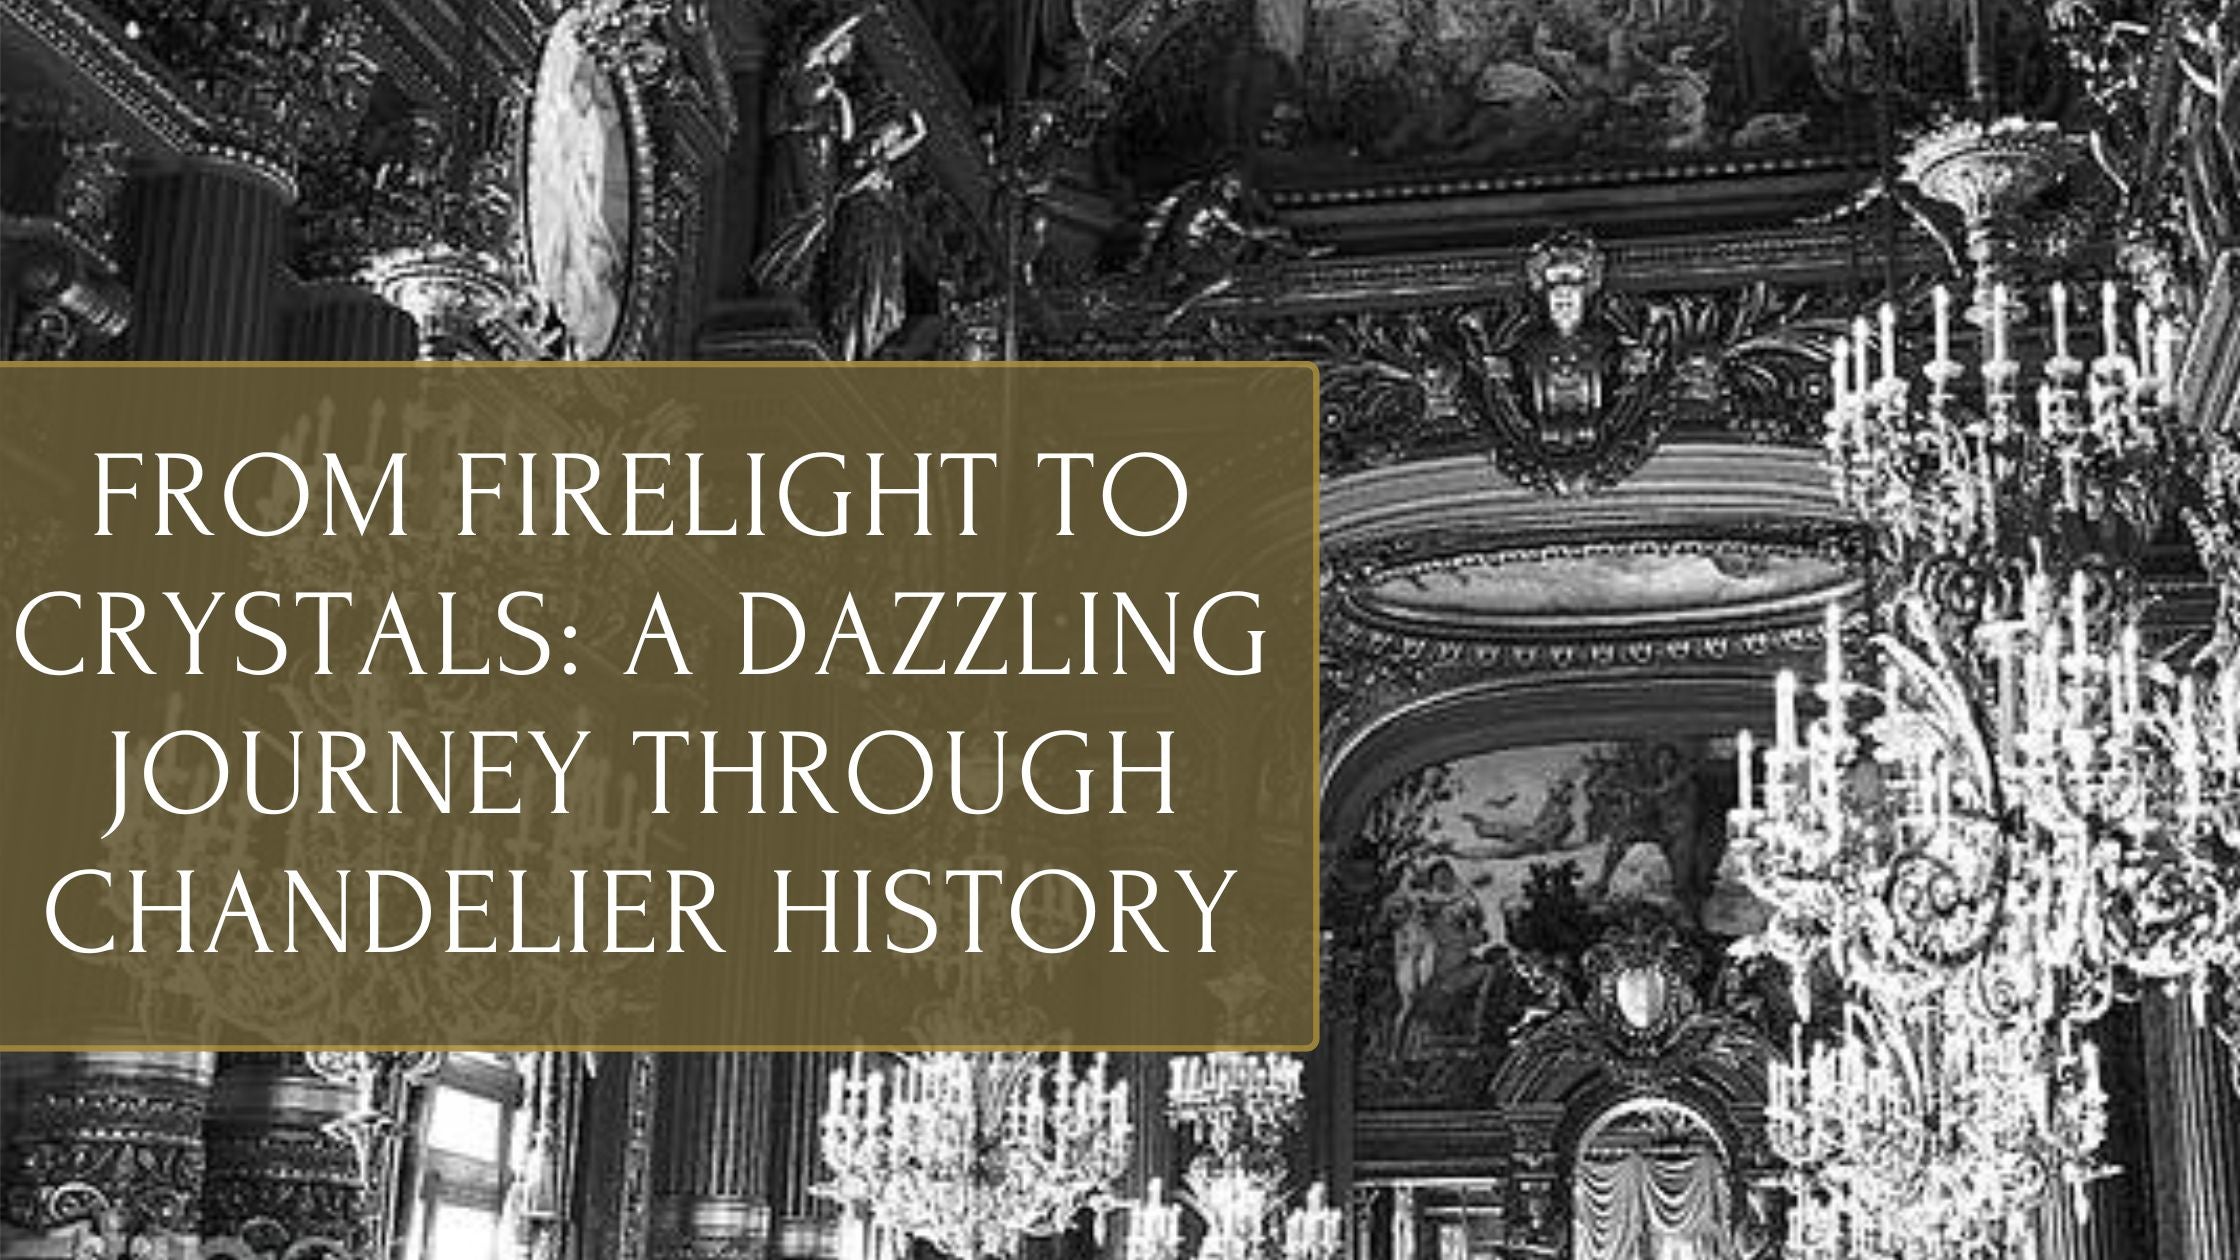 From Firelight to Crystals: A Dazzling Journey Through Chandelier History